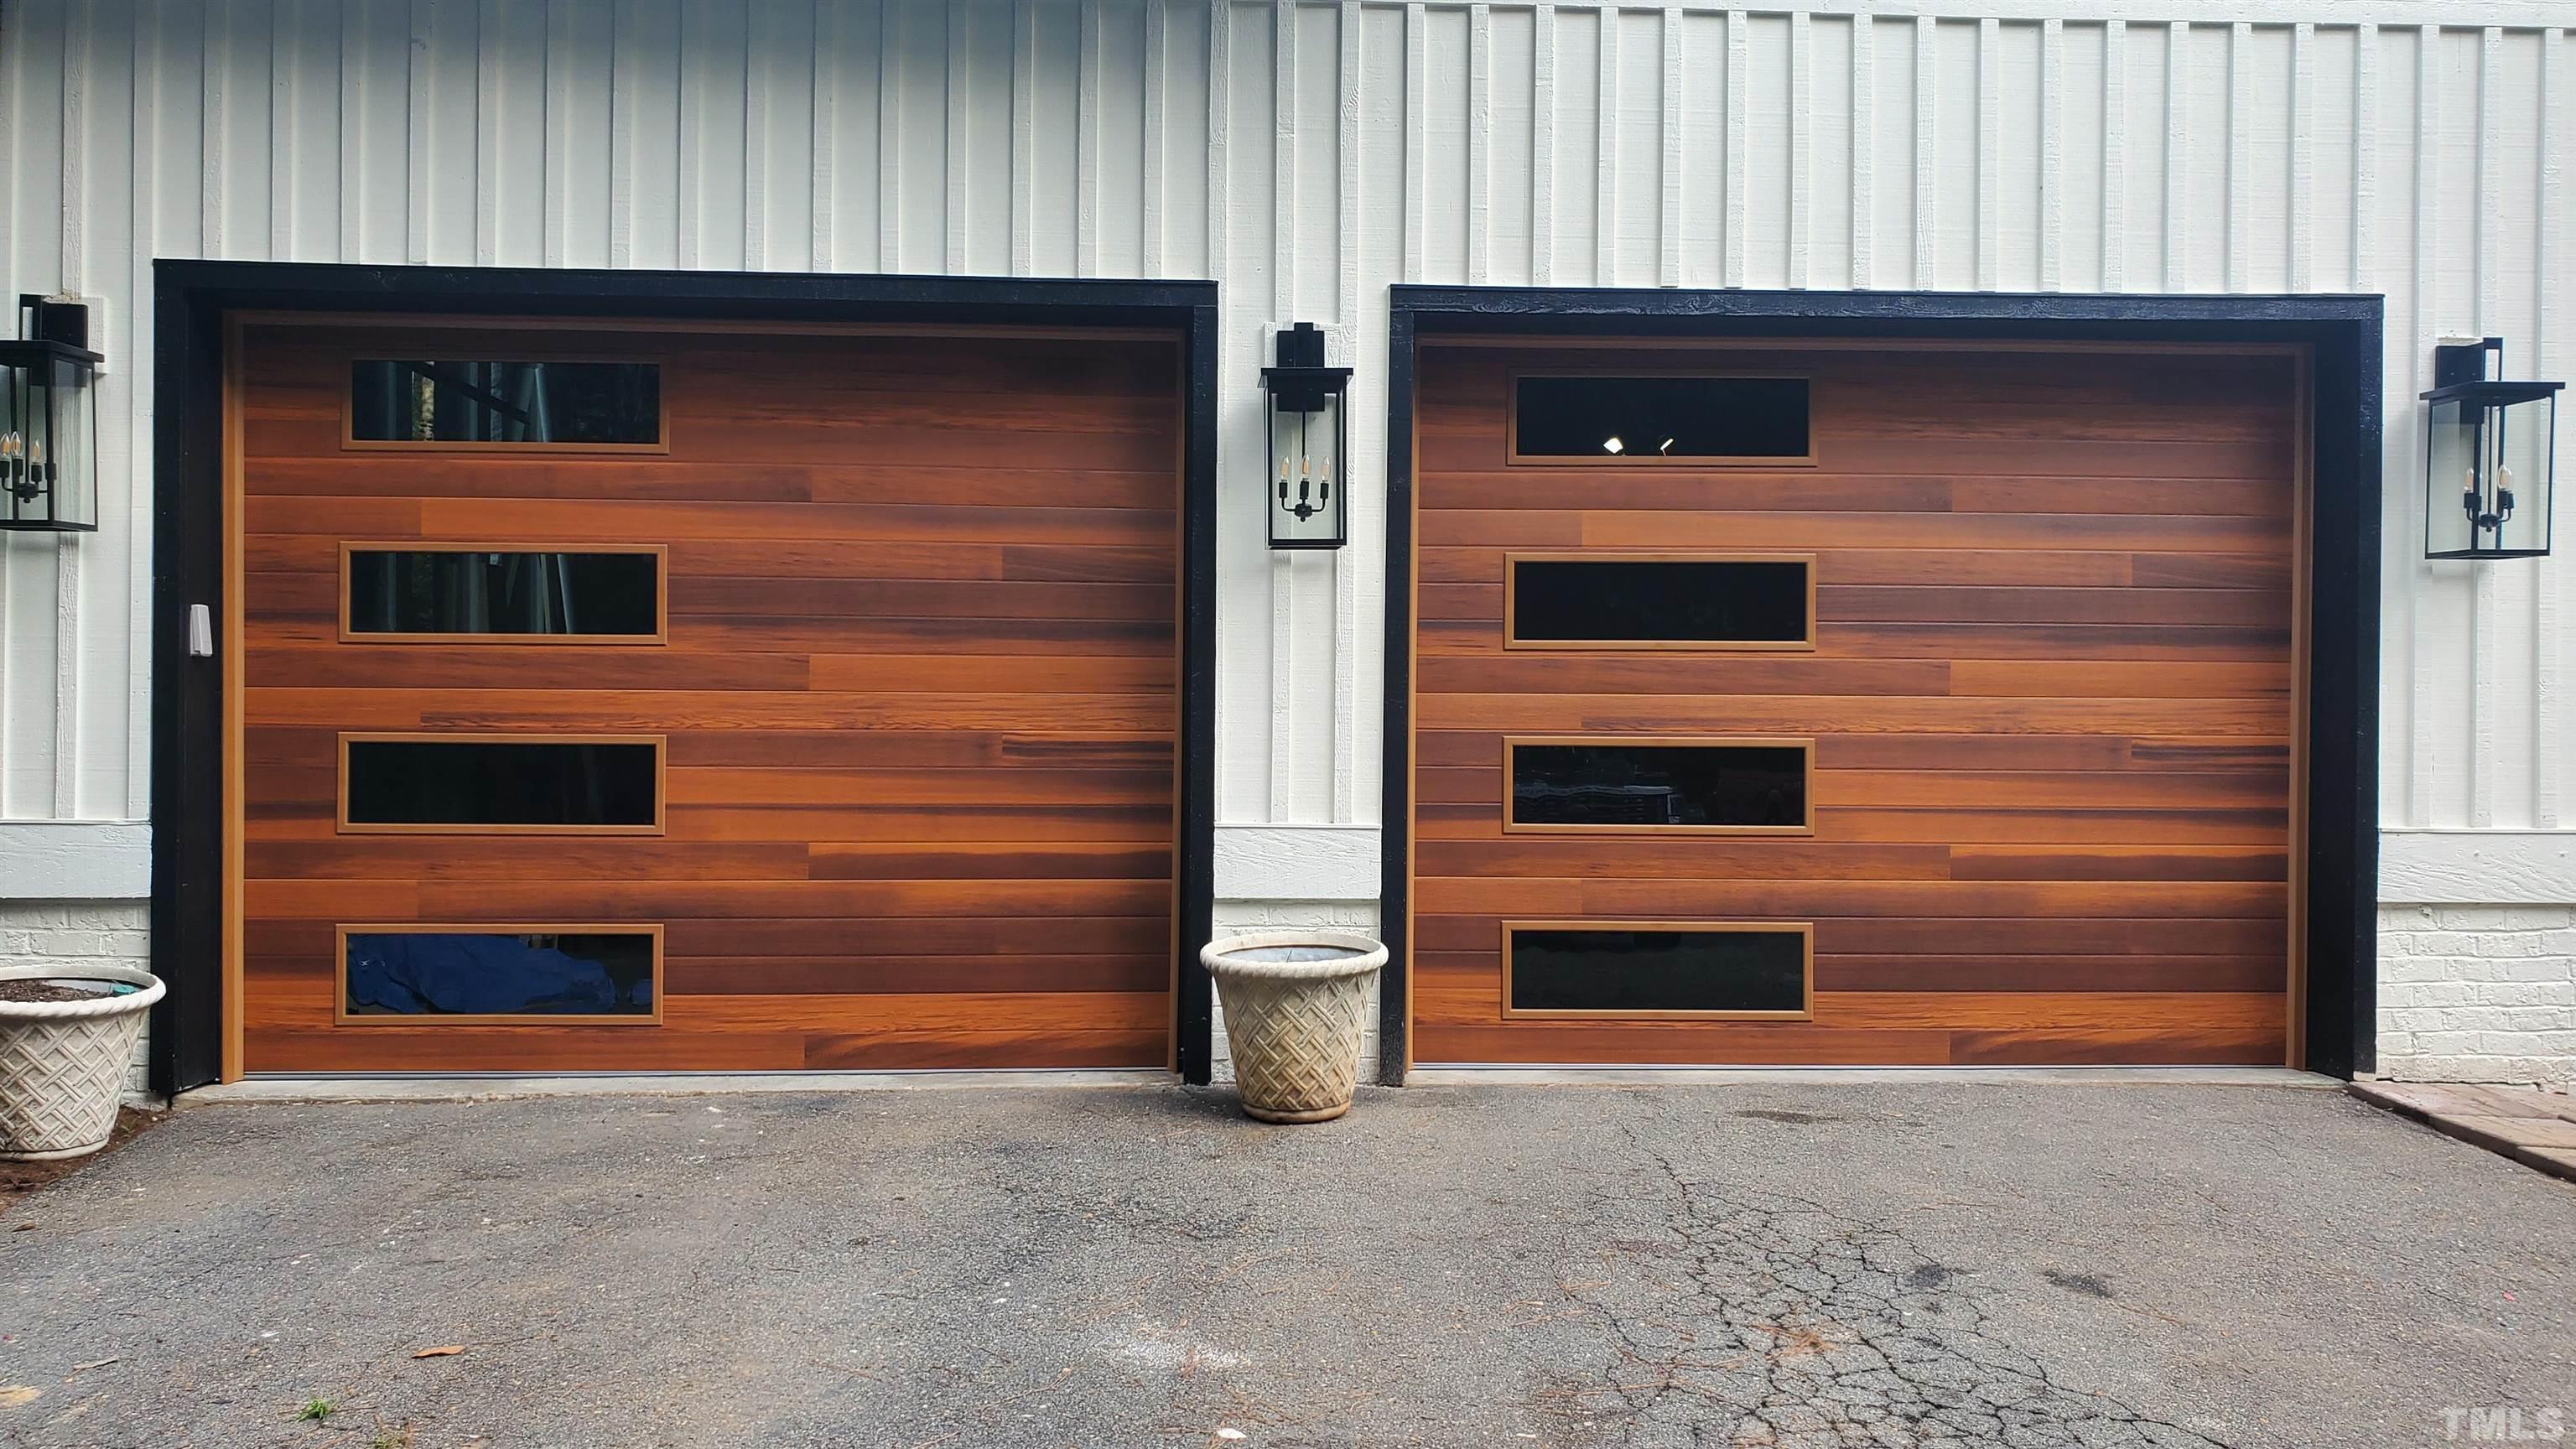 These garage doors are on back order. This is a picture showing what they will look like.